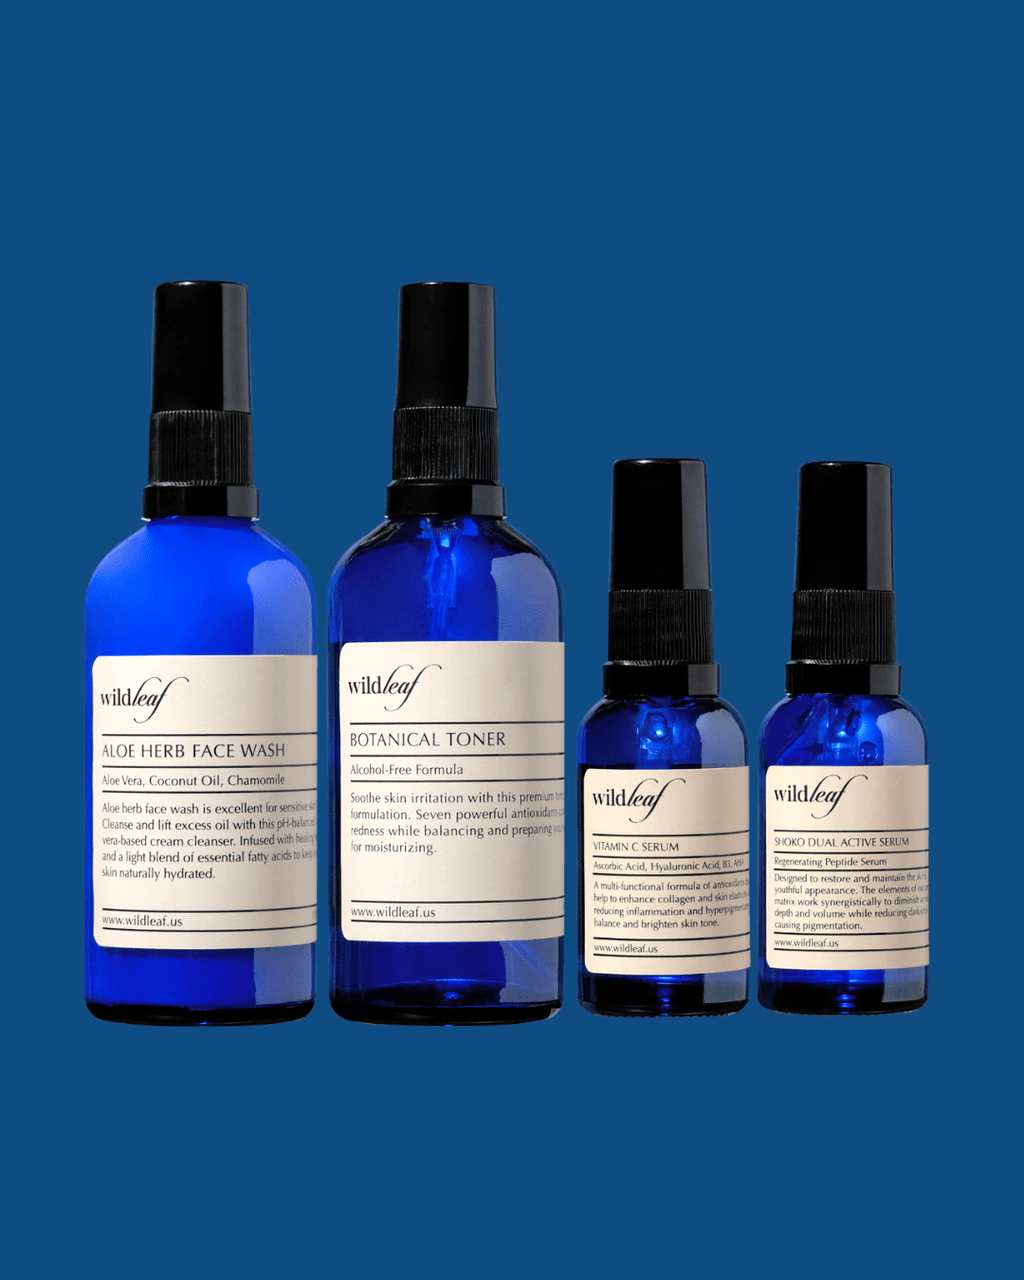 The Anti-Aging Care Set